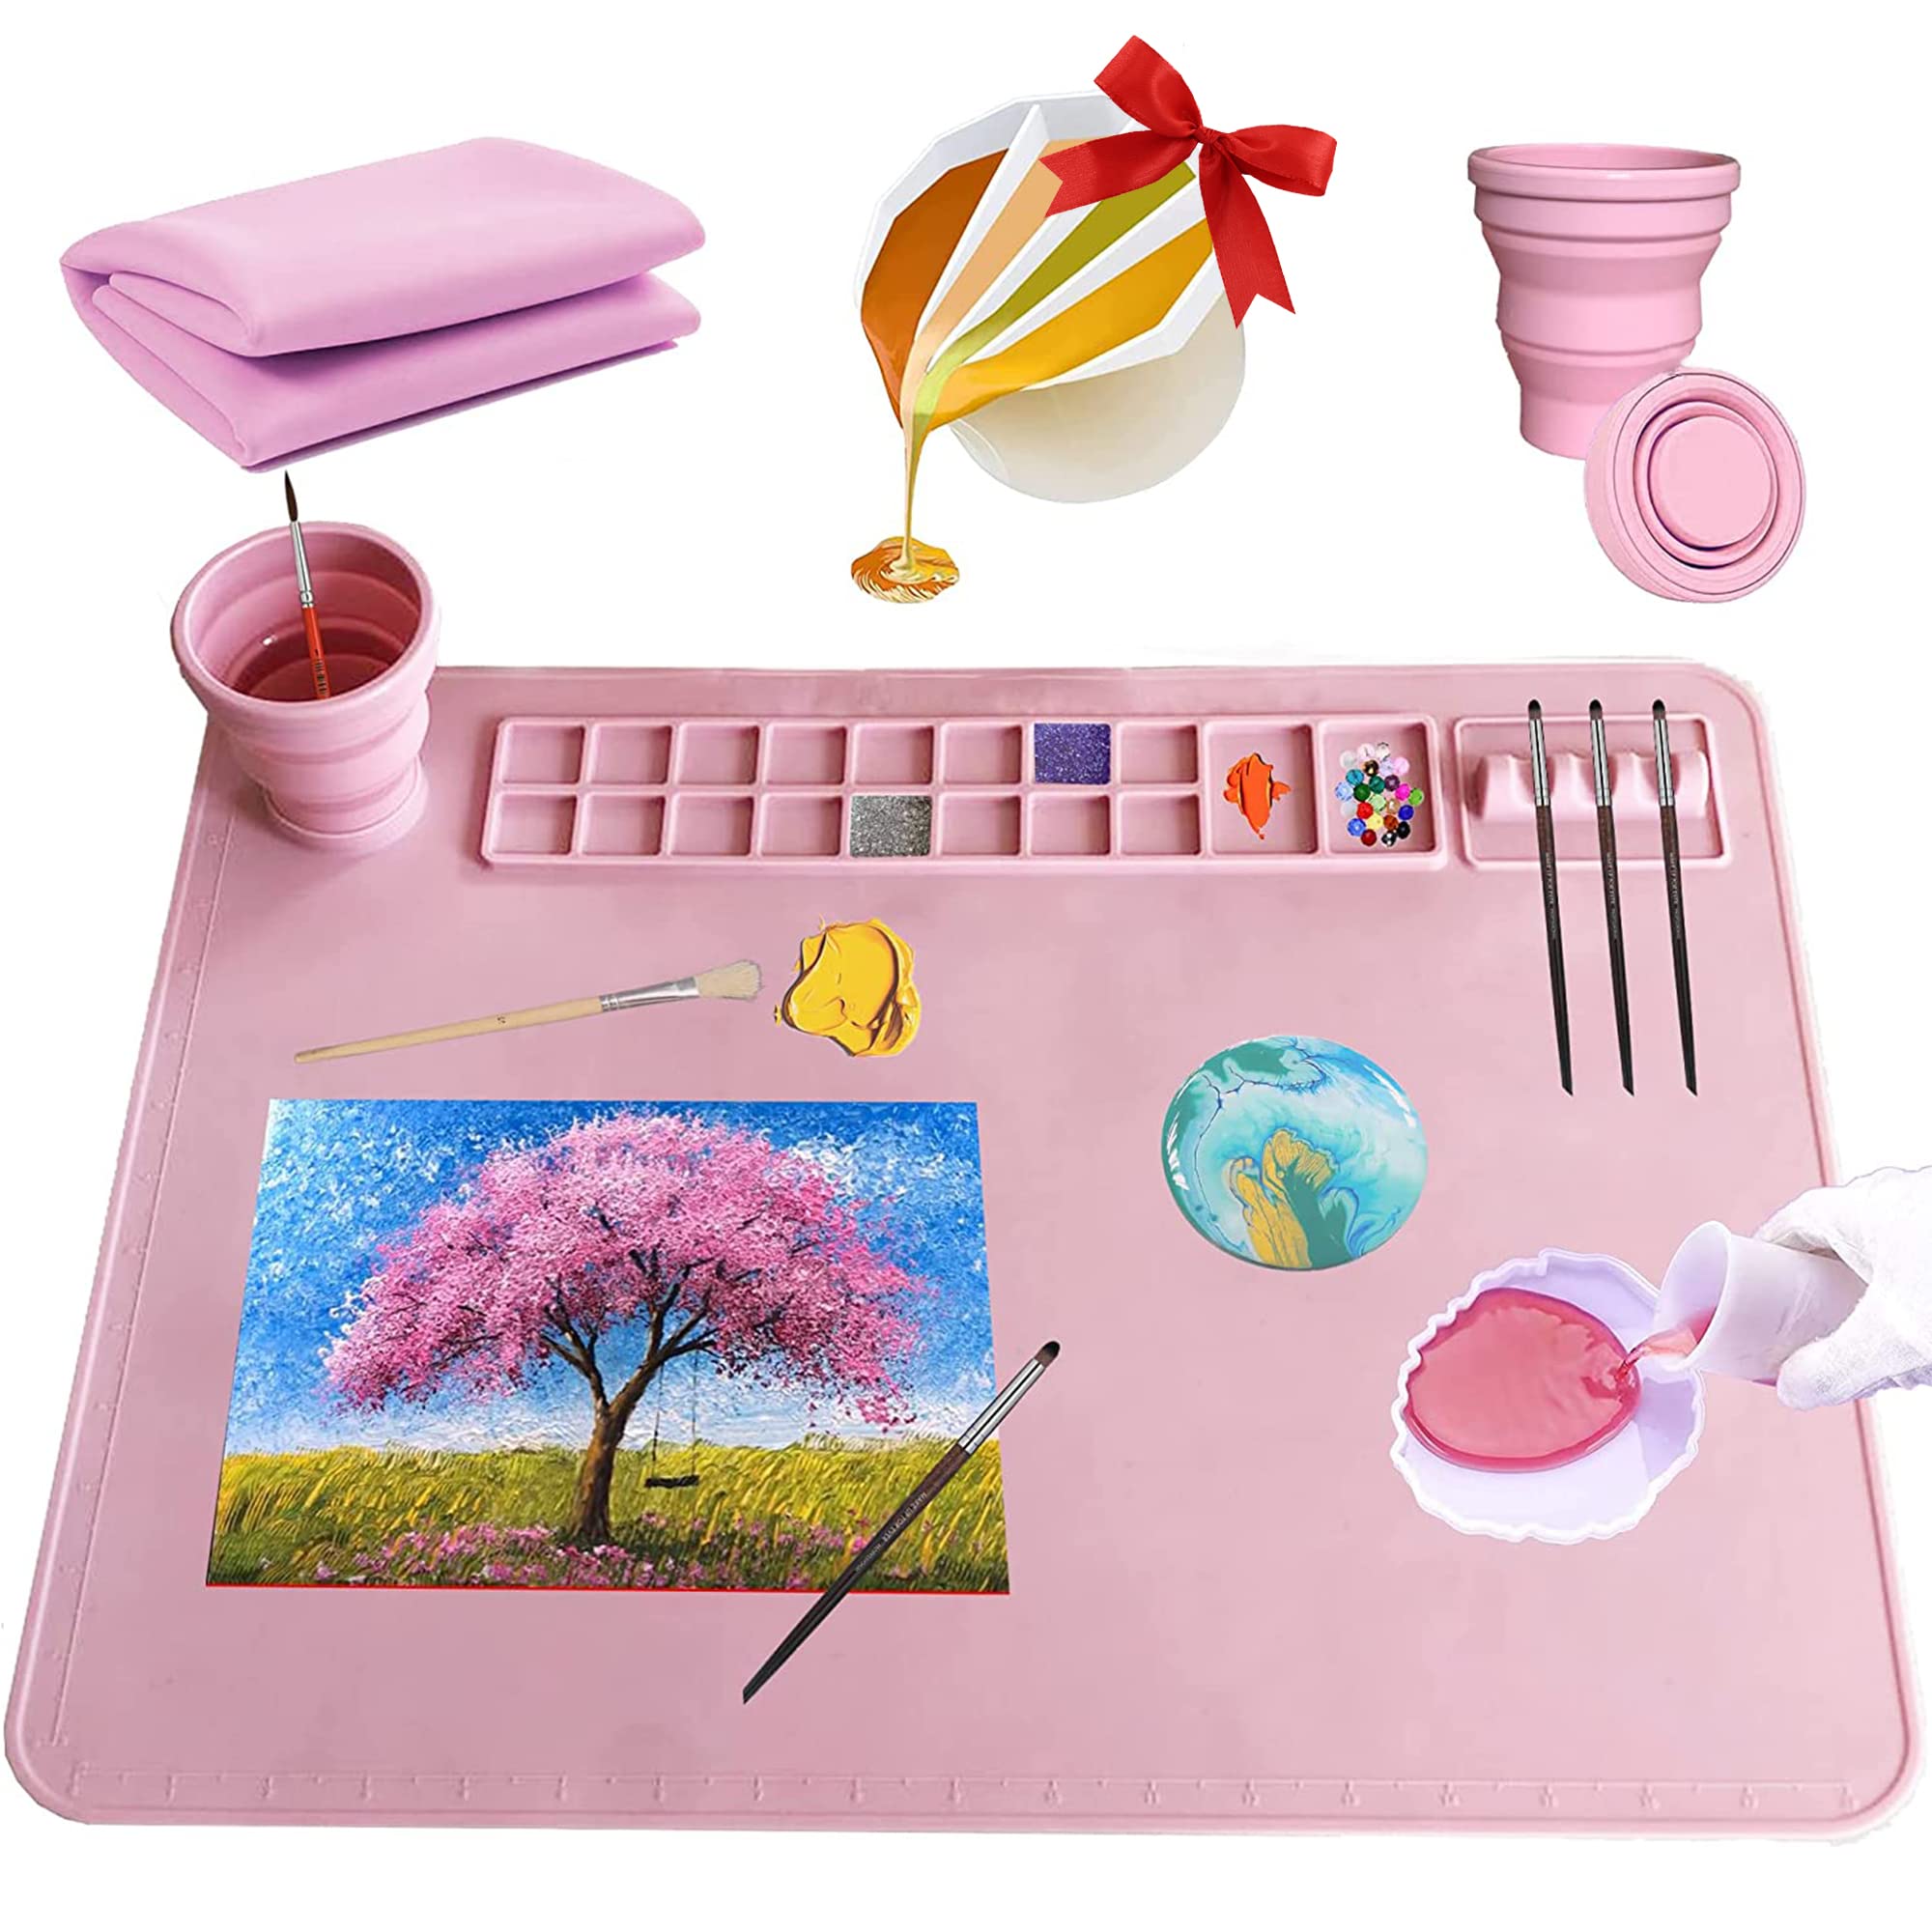 Silicone Painting Mat 20x16, Silicone Mats for Crafts with Removable Cup,10 Paint Brushes,12 Paint Dividers and 2 Paint Dividers,Artist for Kids